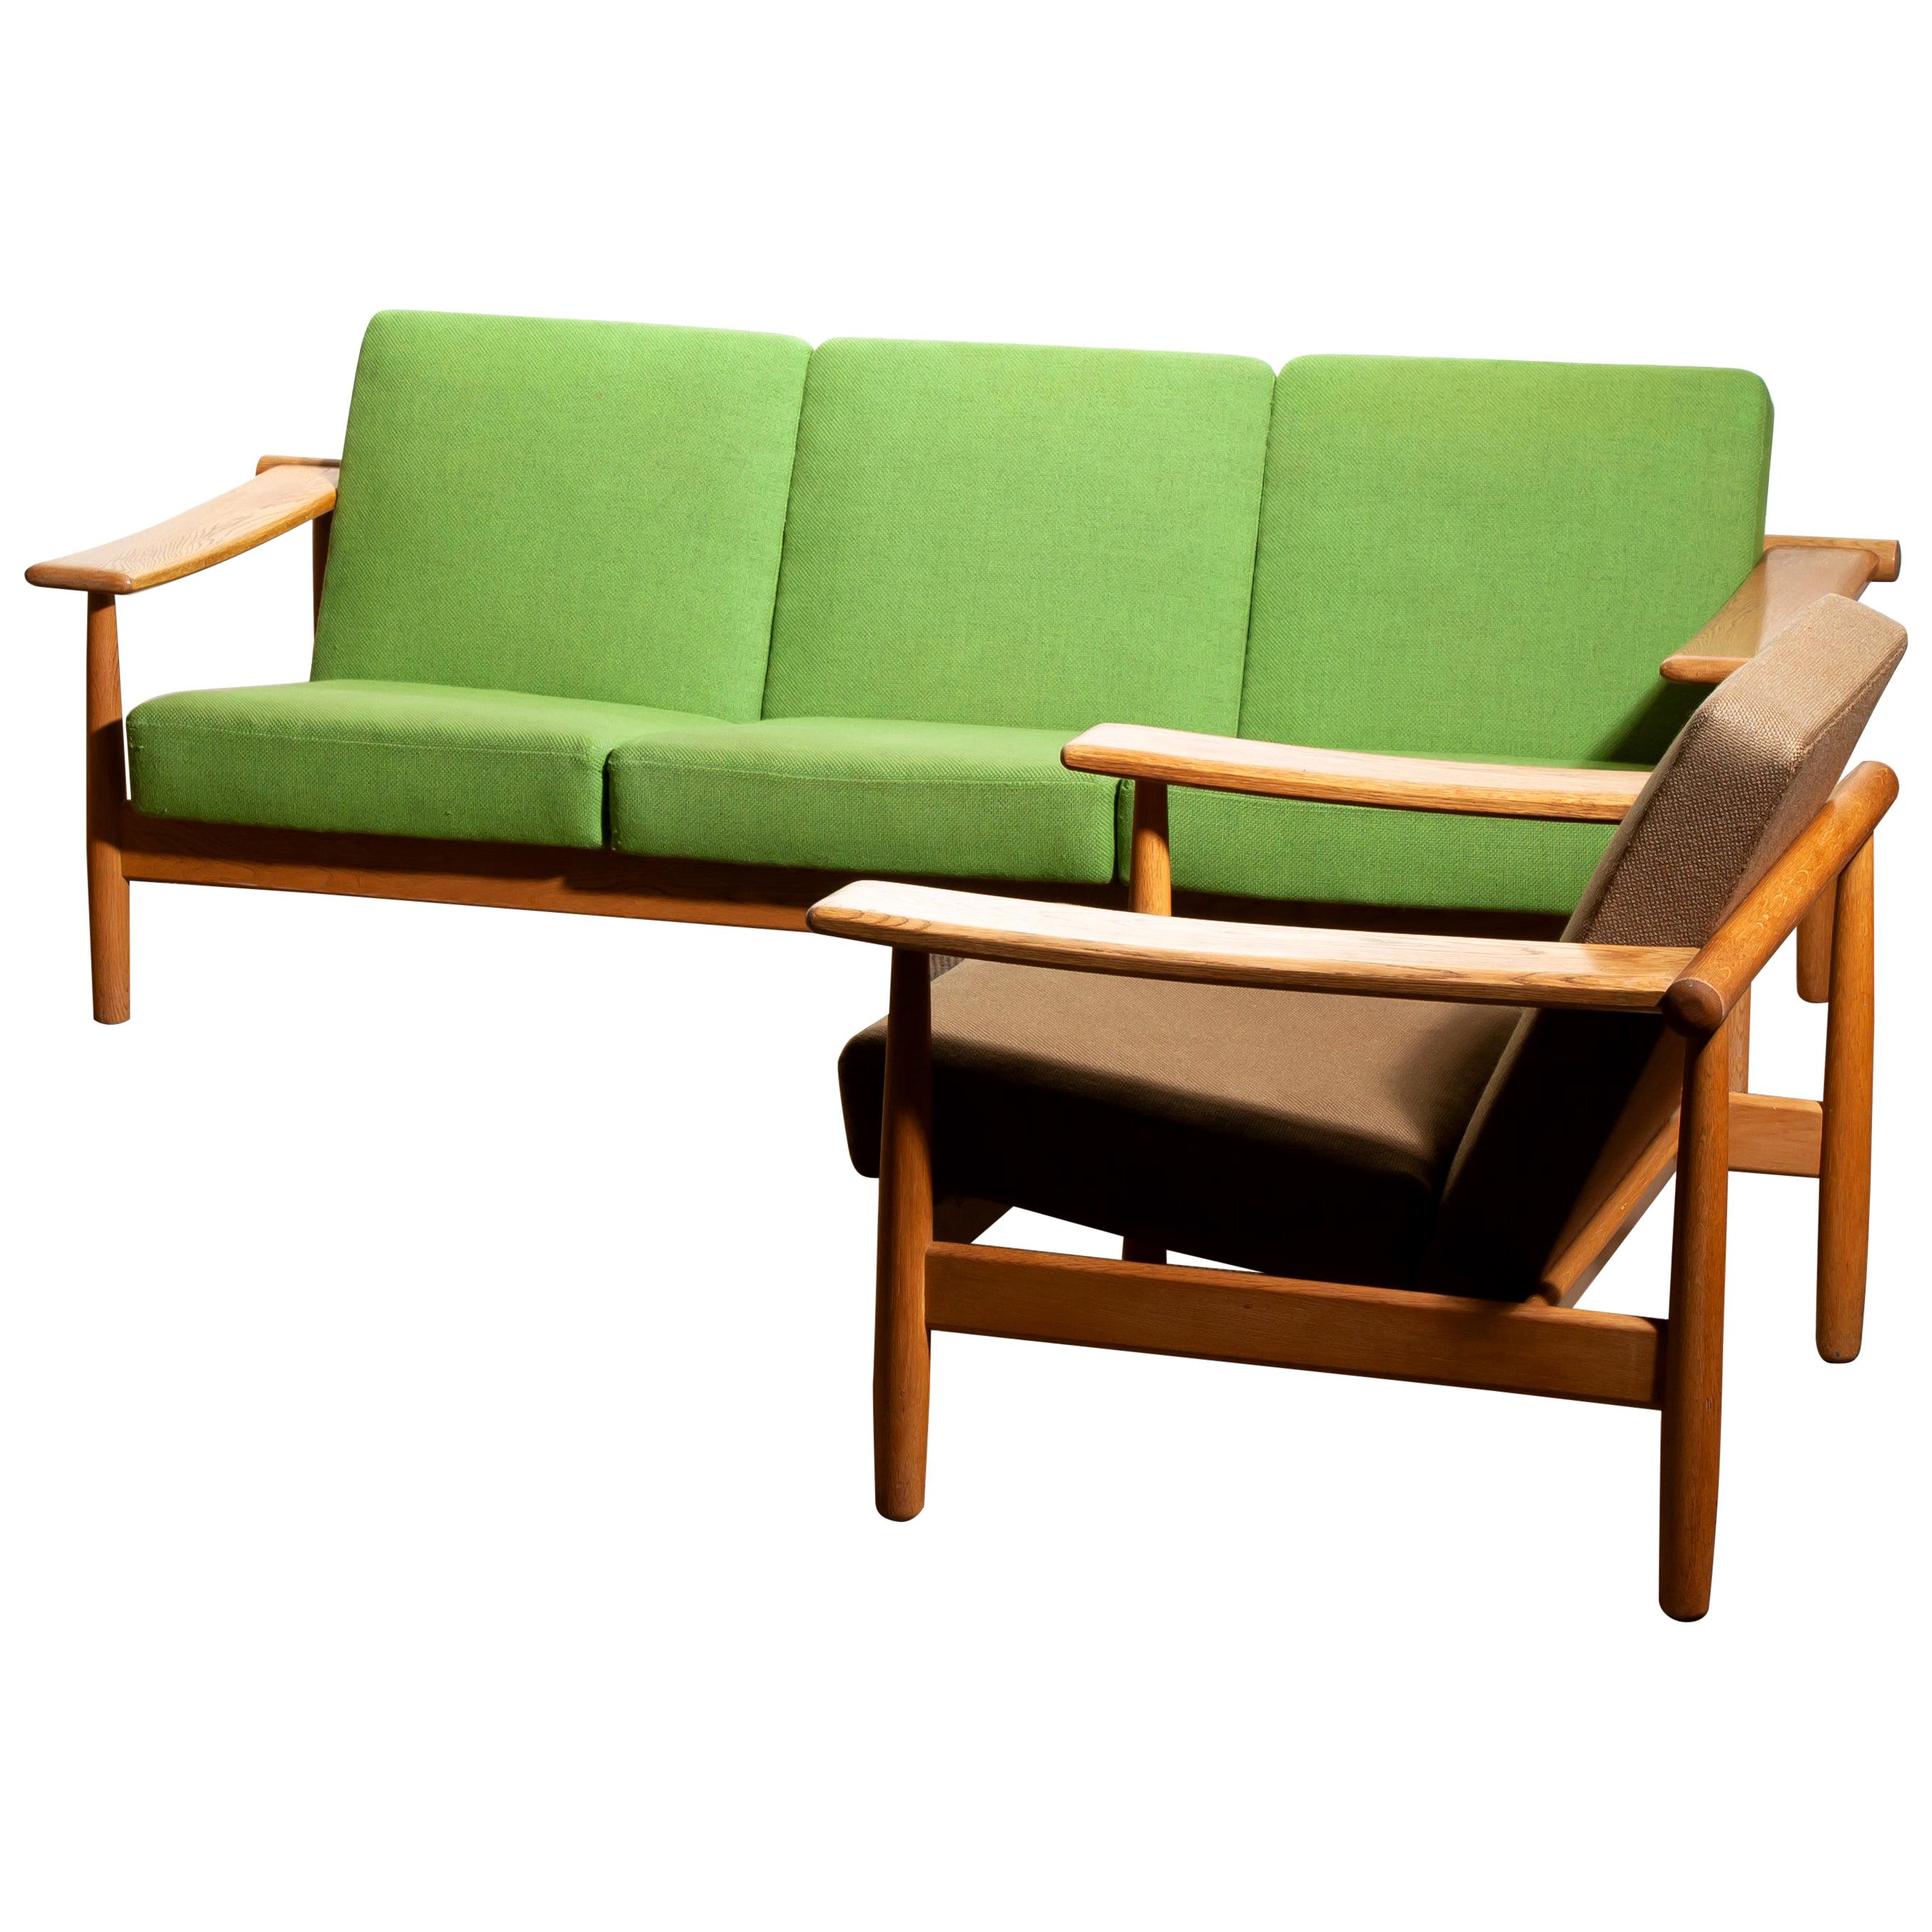 Beautiful oak sofa and lounge chair / living room set from the 1960s made in Denmark.
The oak frames are in good condition.
The fabric is in fair condition like the pictures shows.
Beautiful set!